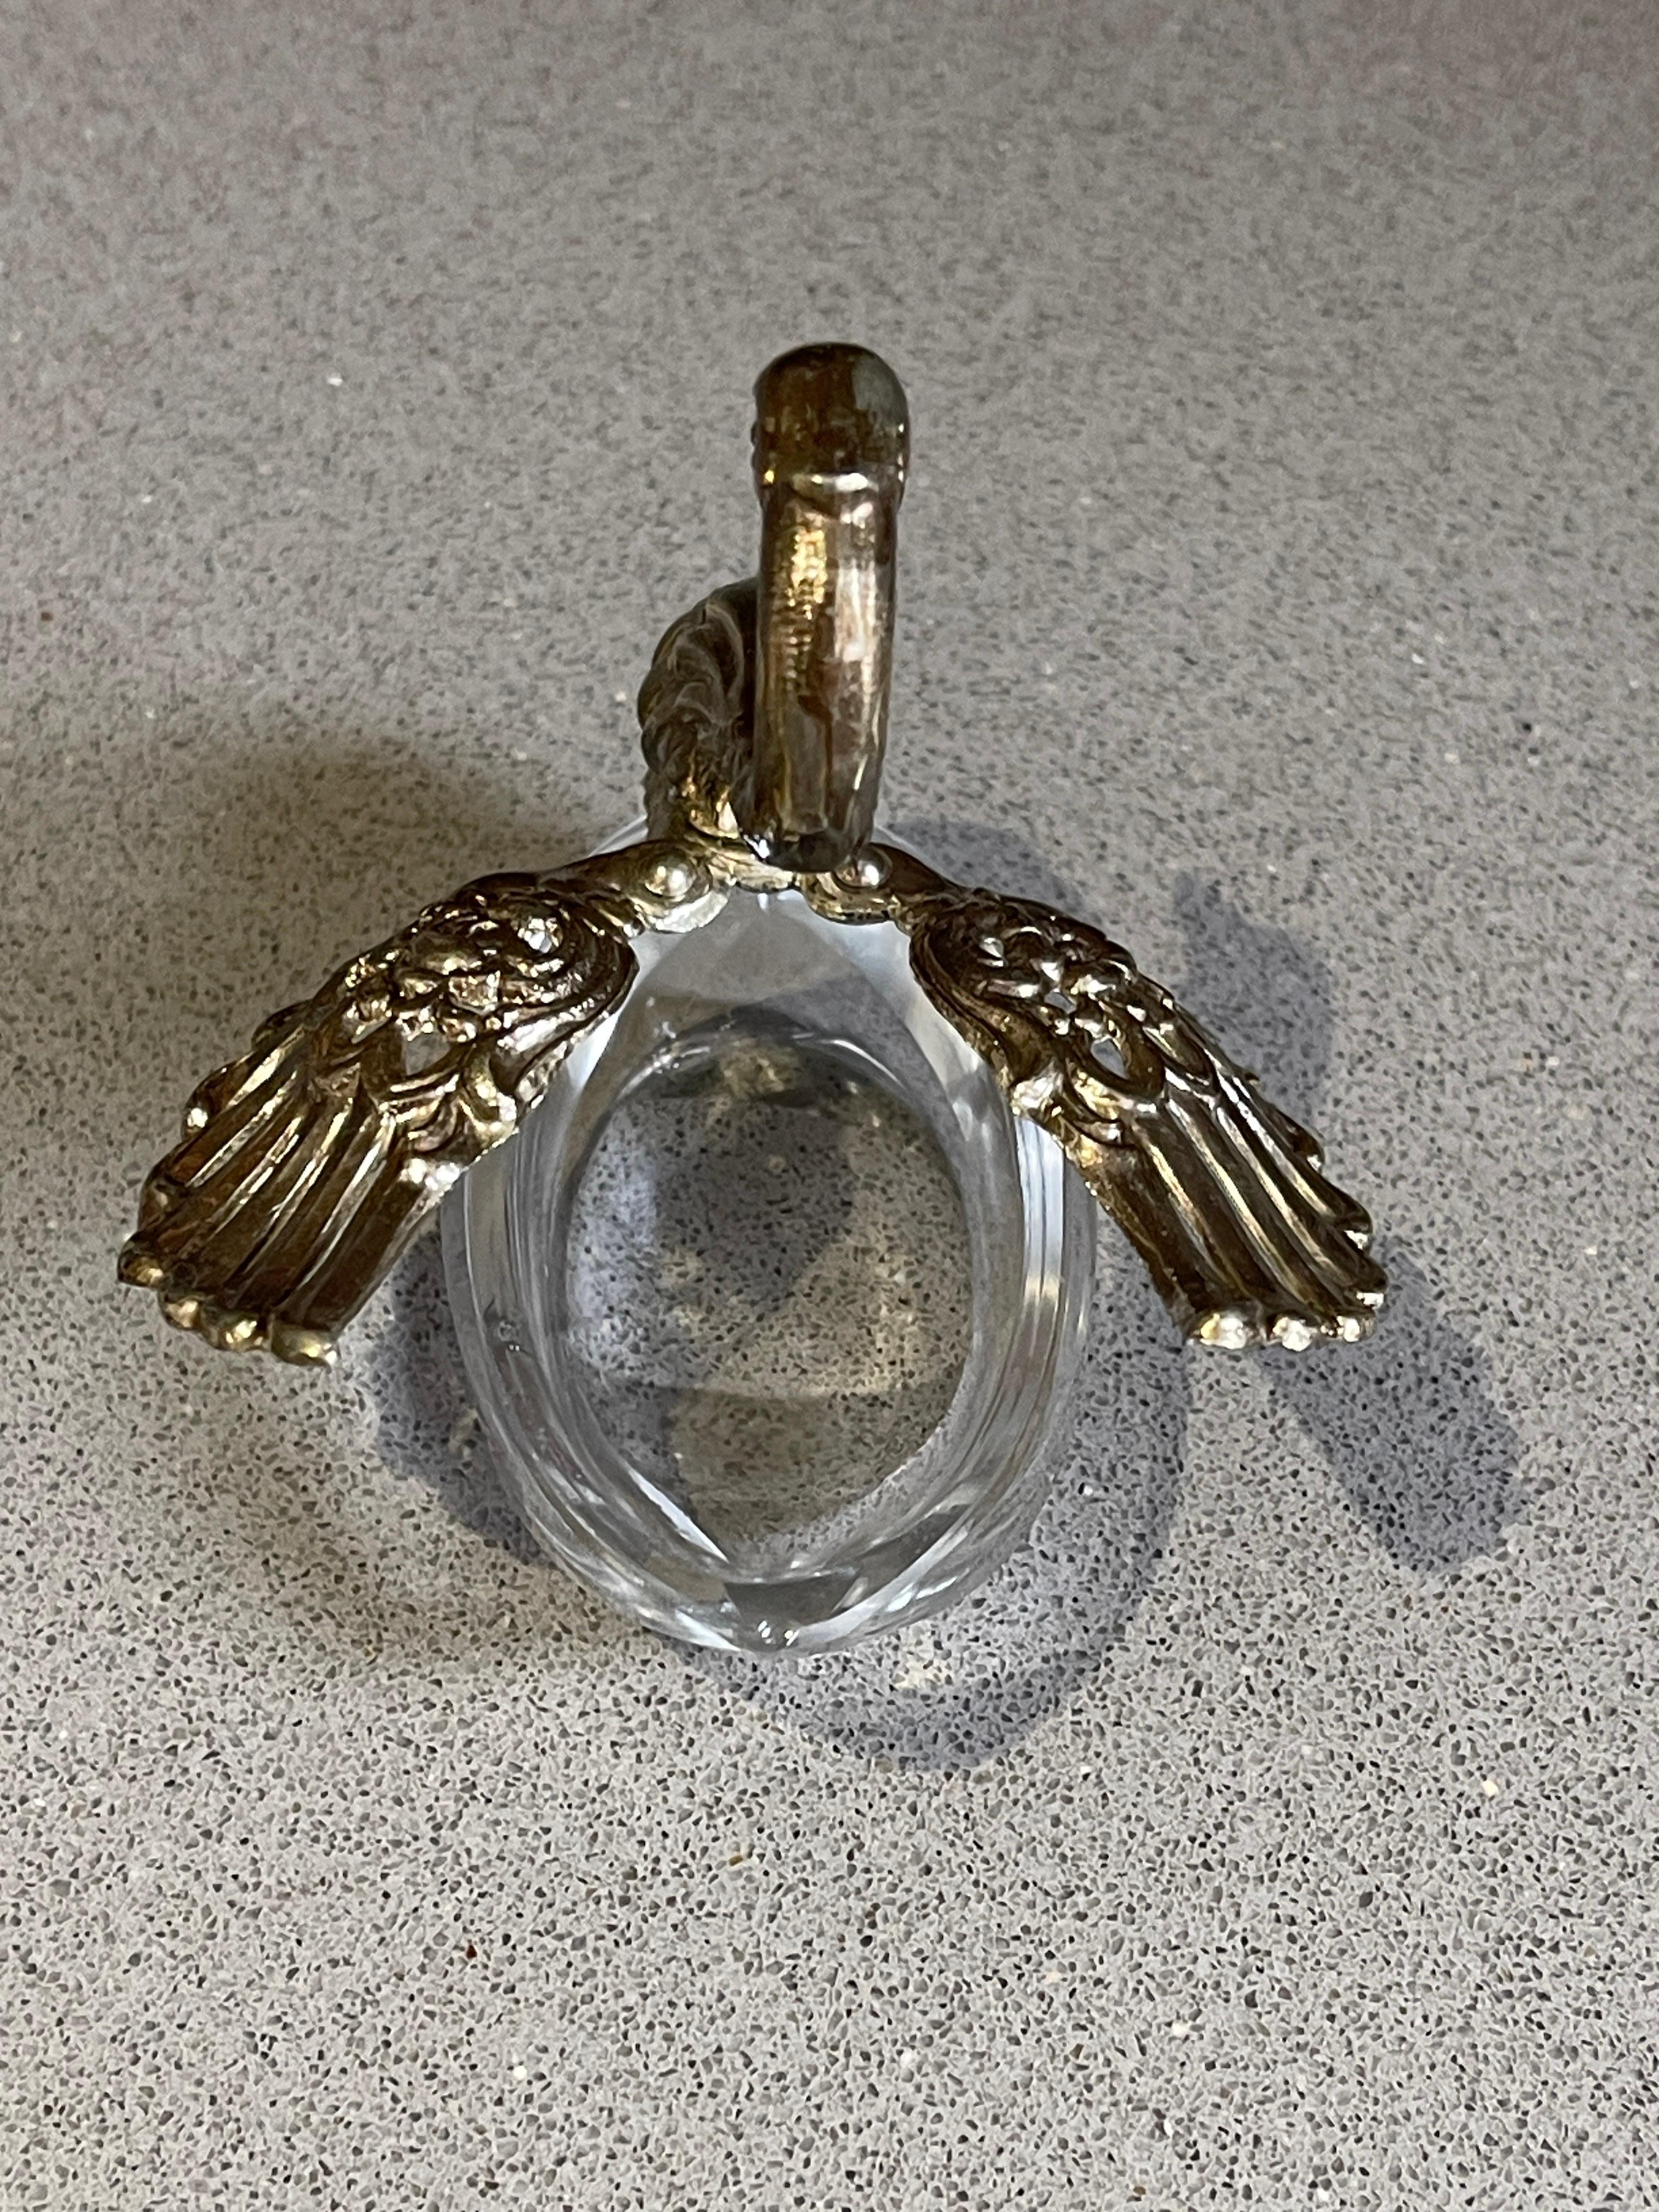 Mid-20th Century Silver Salt Shaker, A Pair of Antique Salt Shaker Crystal Swann Moving Wings For Sale